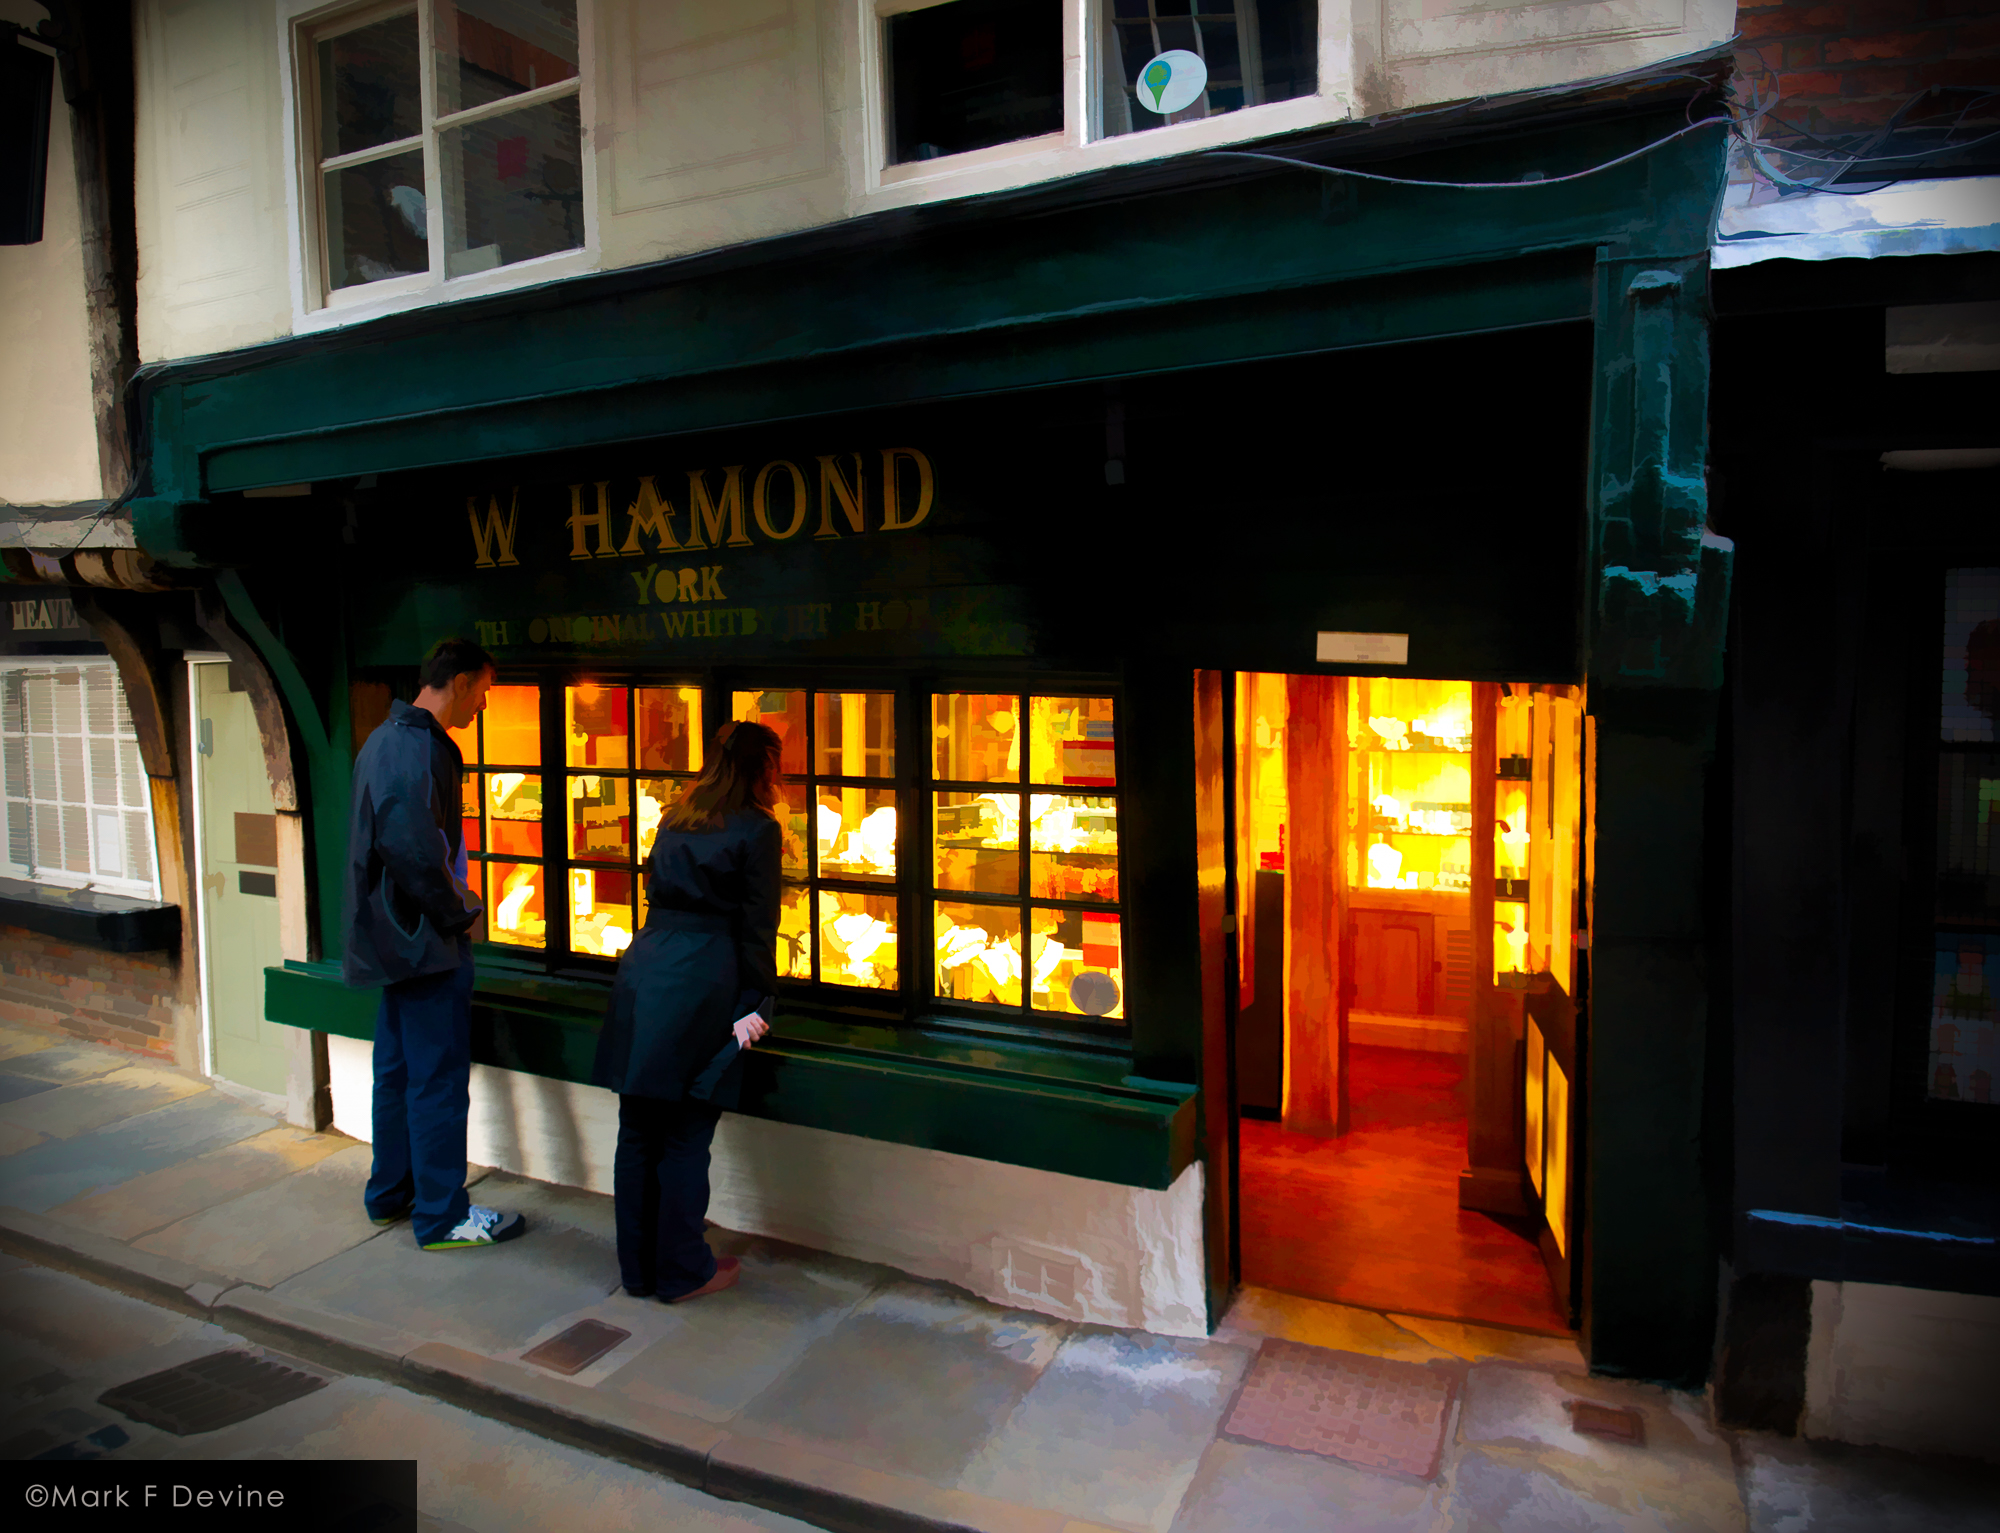 A young couple is window shopping at W Hamond Jewelers in The Shambles at York, England.